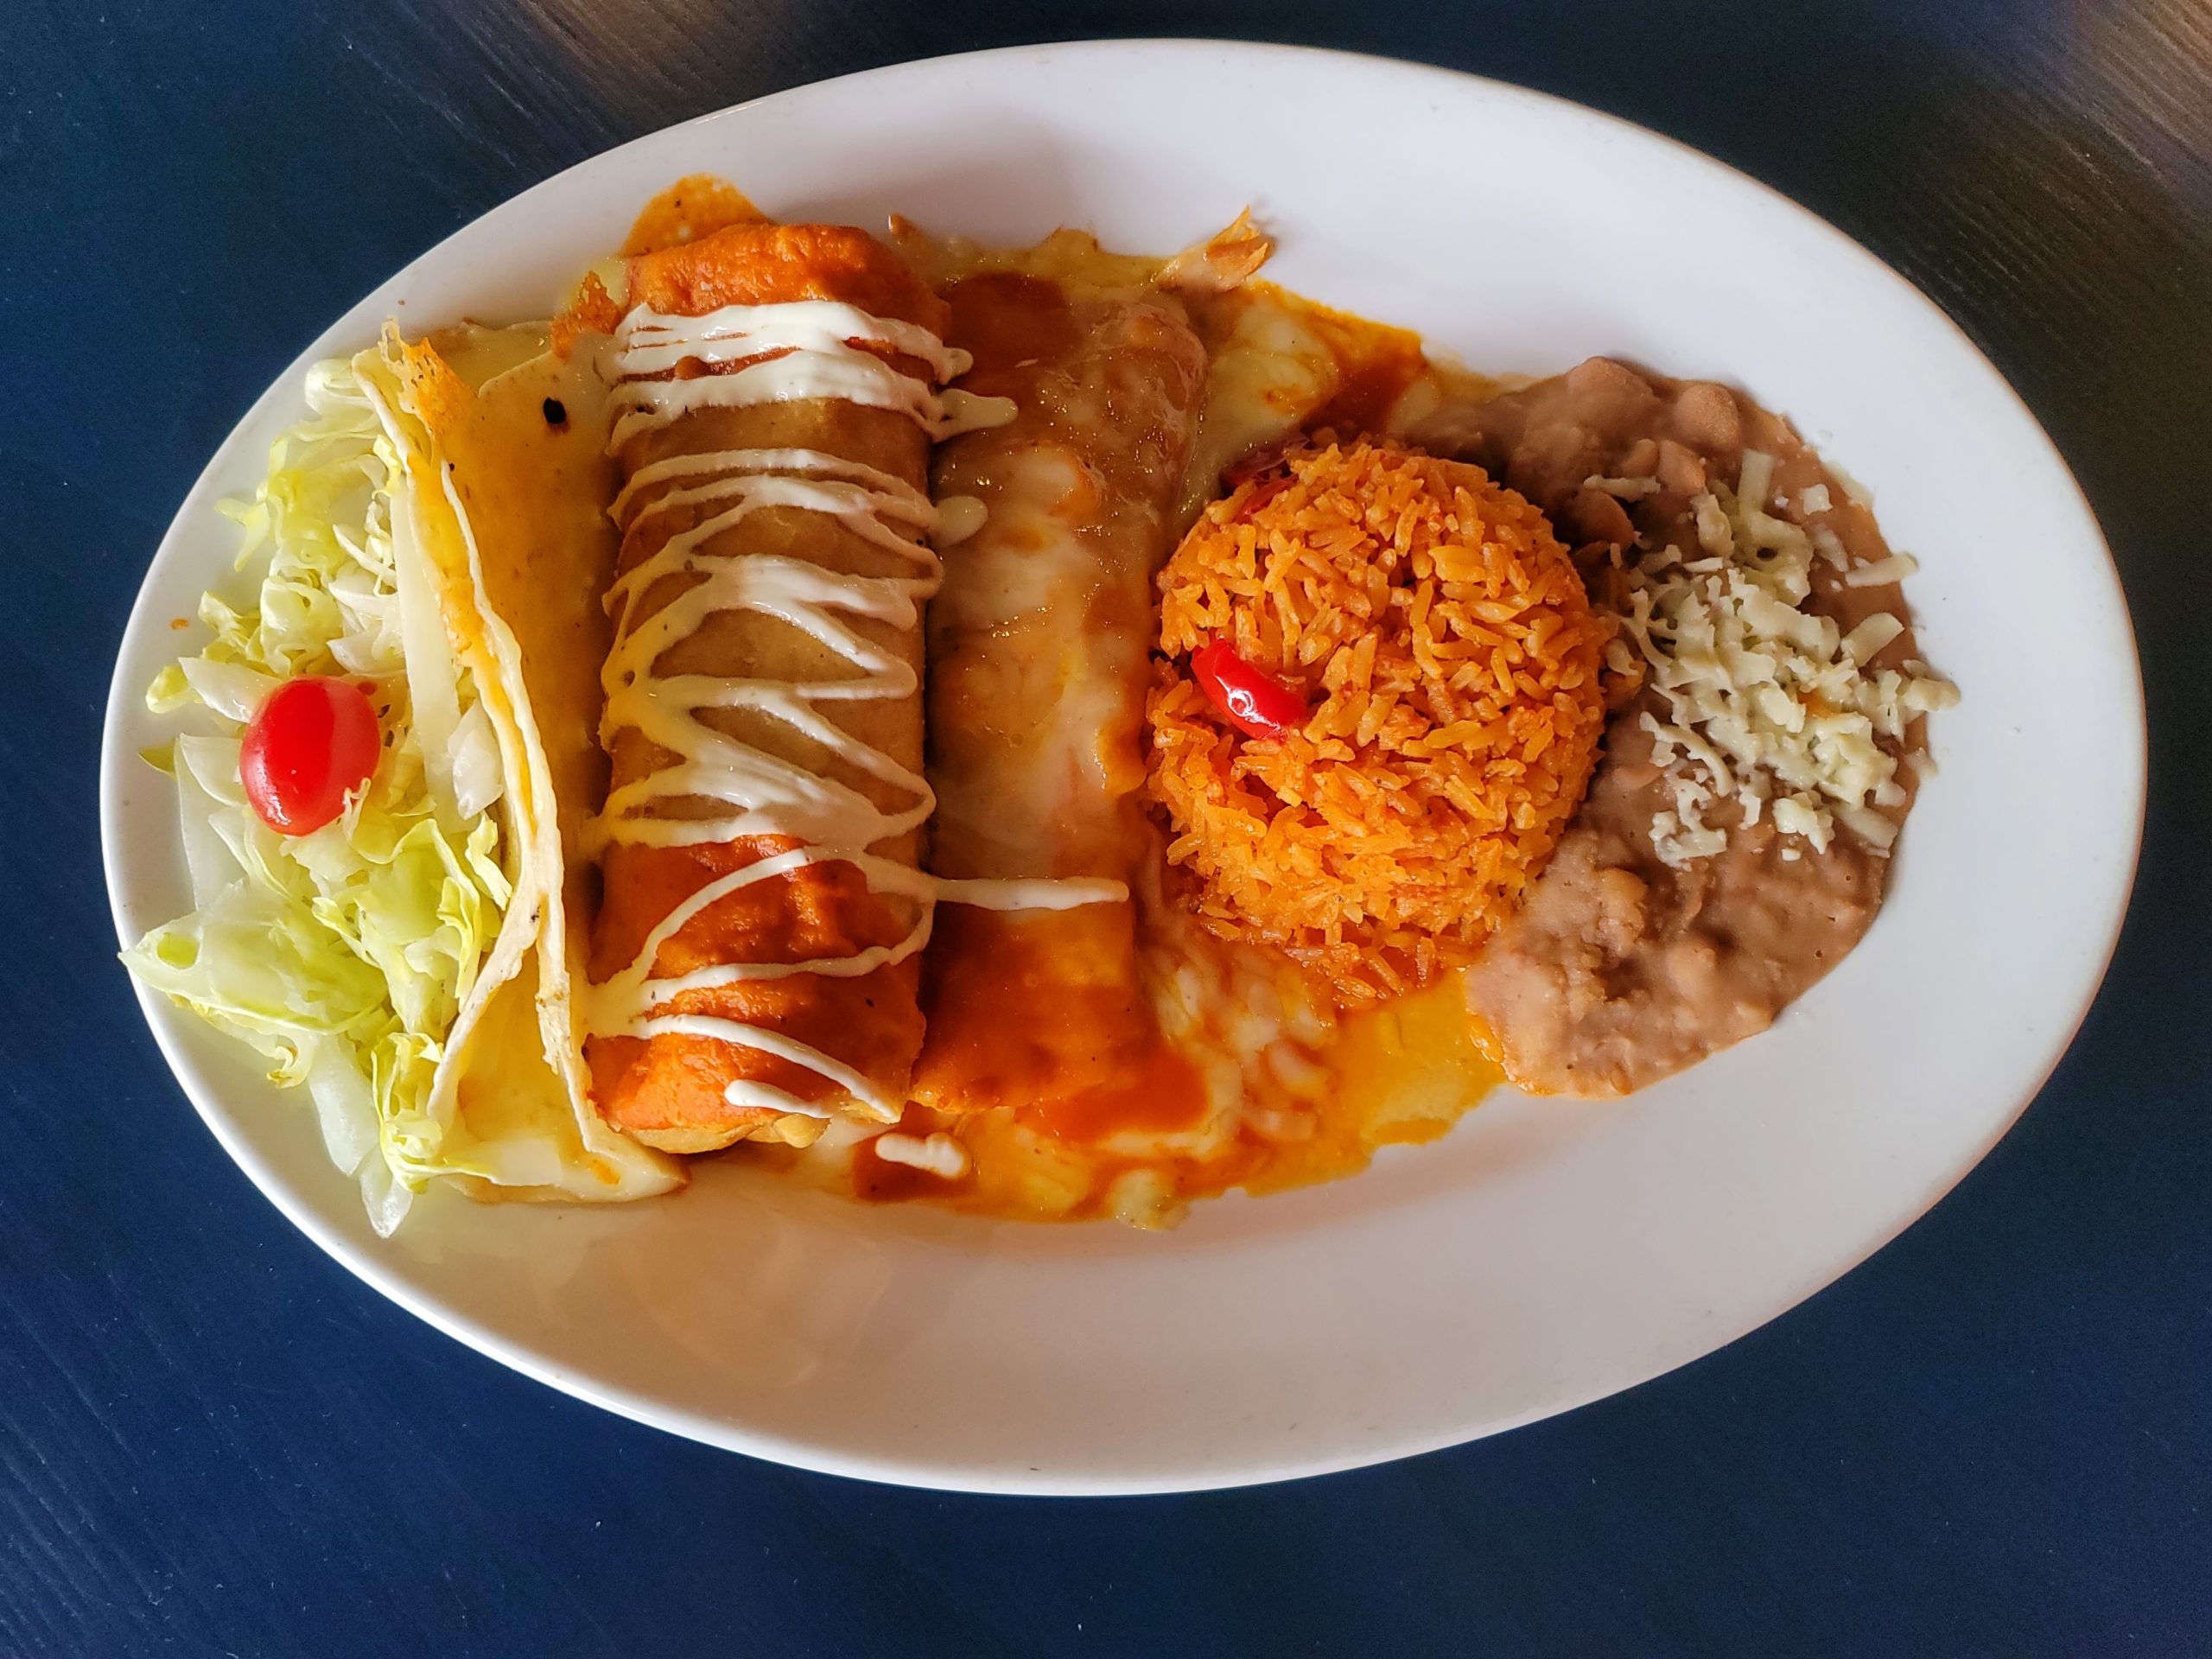 Dish called Combination 1 with Shredded Beef Chimichanga, Cheese Quesadilla and Chicken Enchilada with a side of Mexican Rice, Brown Beans and Small Salad, topped with sour cream and melted cheese